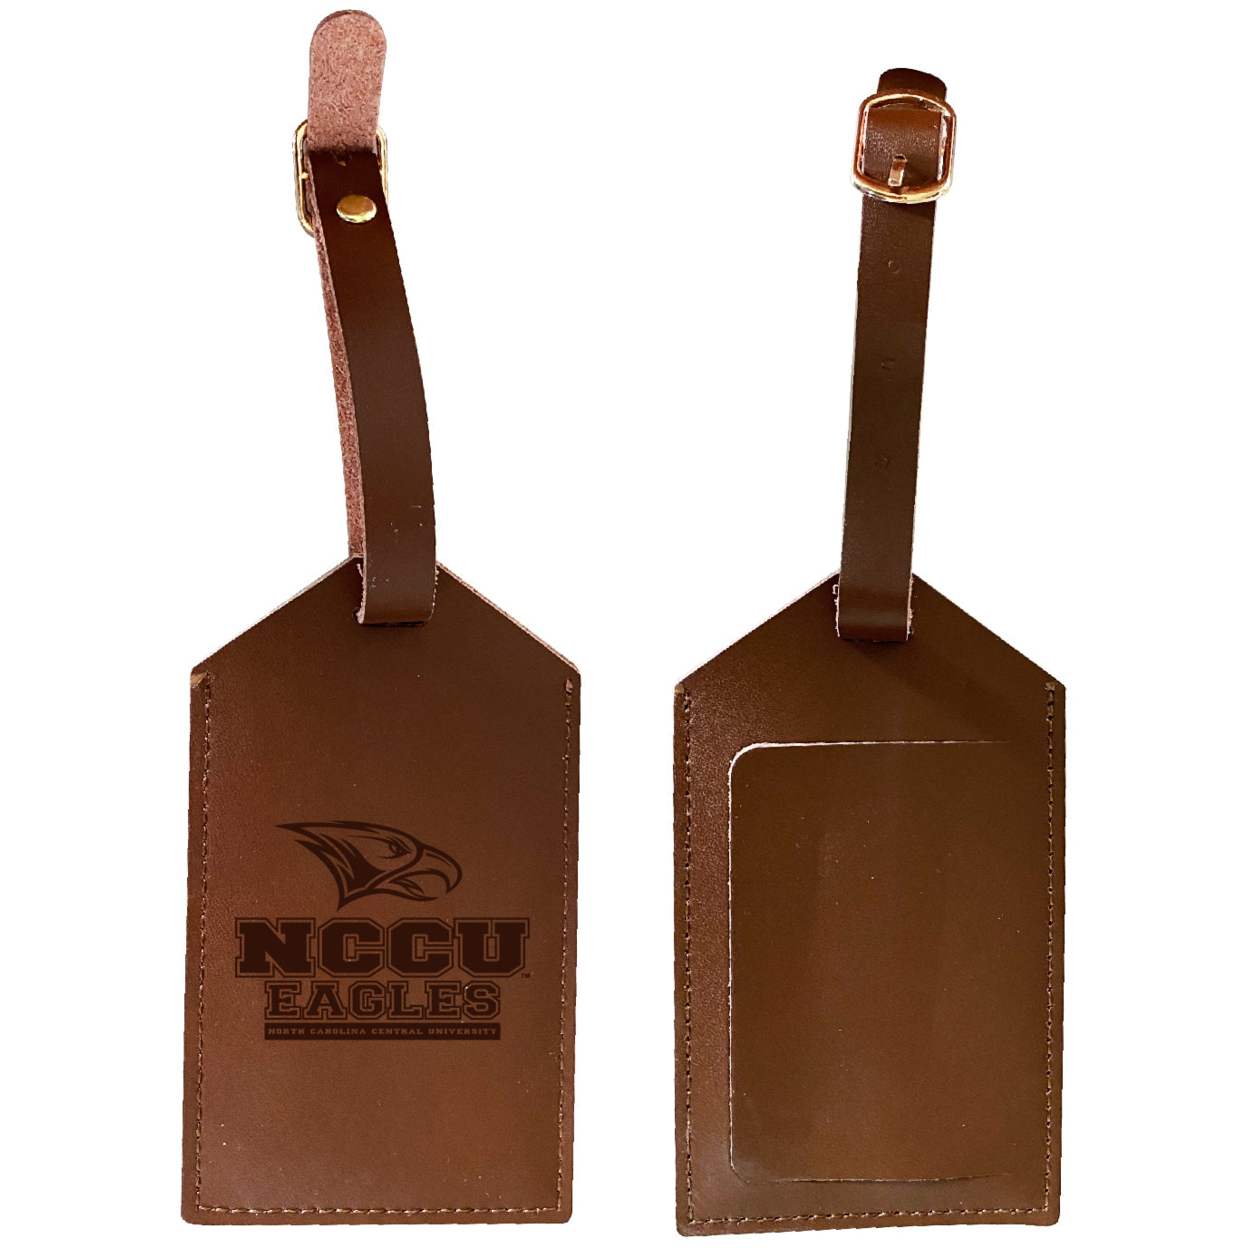 North Carolina Central Eagles Leather Luggage Tag Engraved